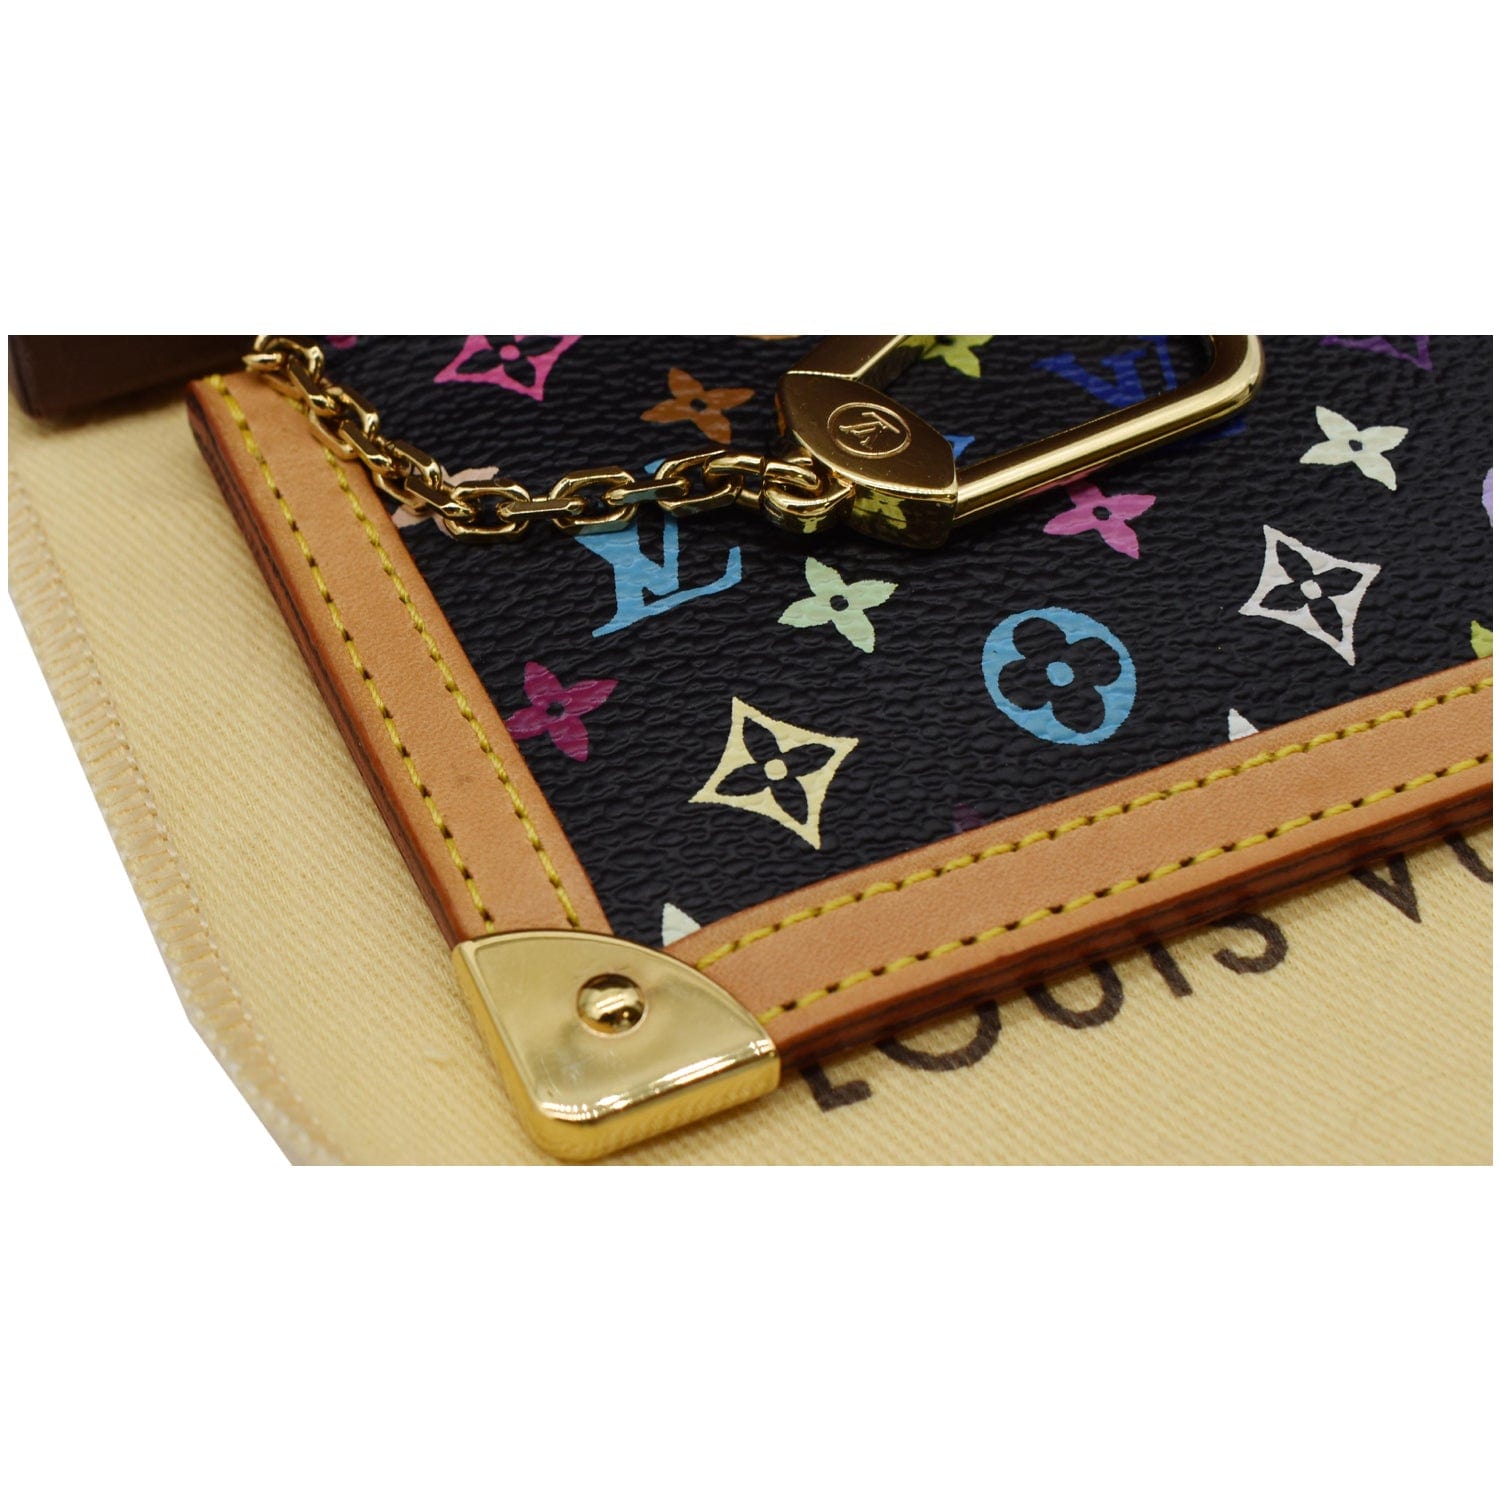 Buy [Used] LOUIS VUITTON Pochette Cle Coin Case Monogram M62650 from Japan  - Buy authentic Plus exclusive items from Japan